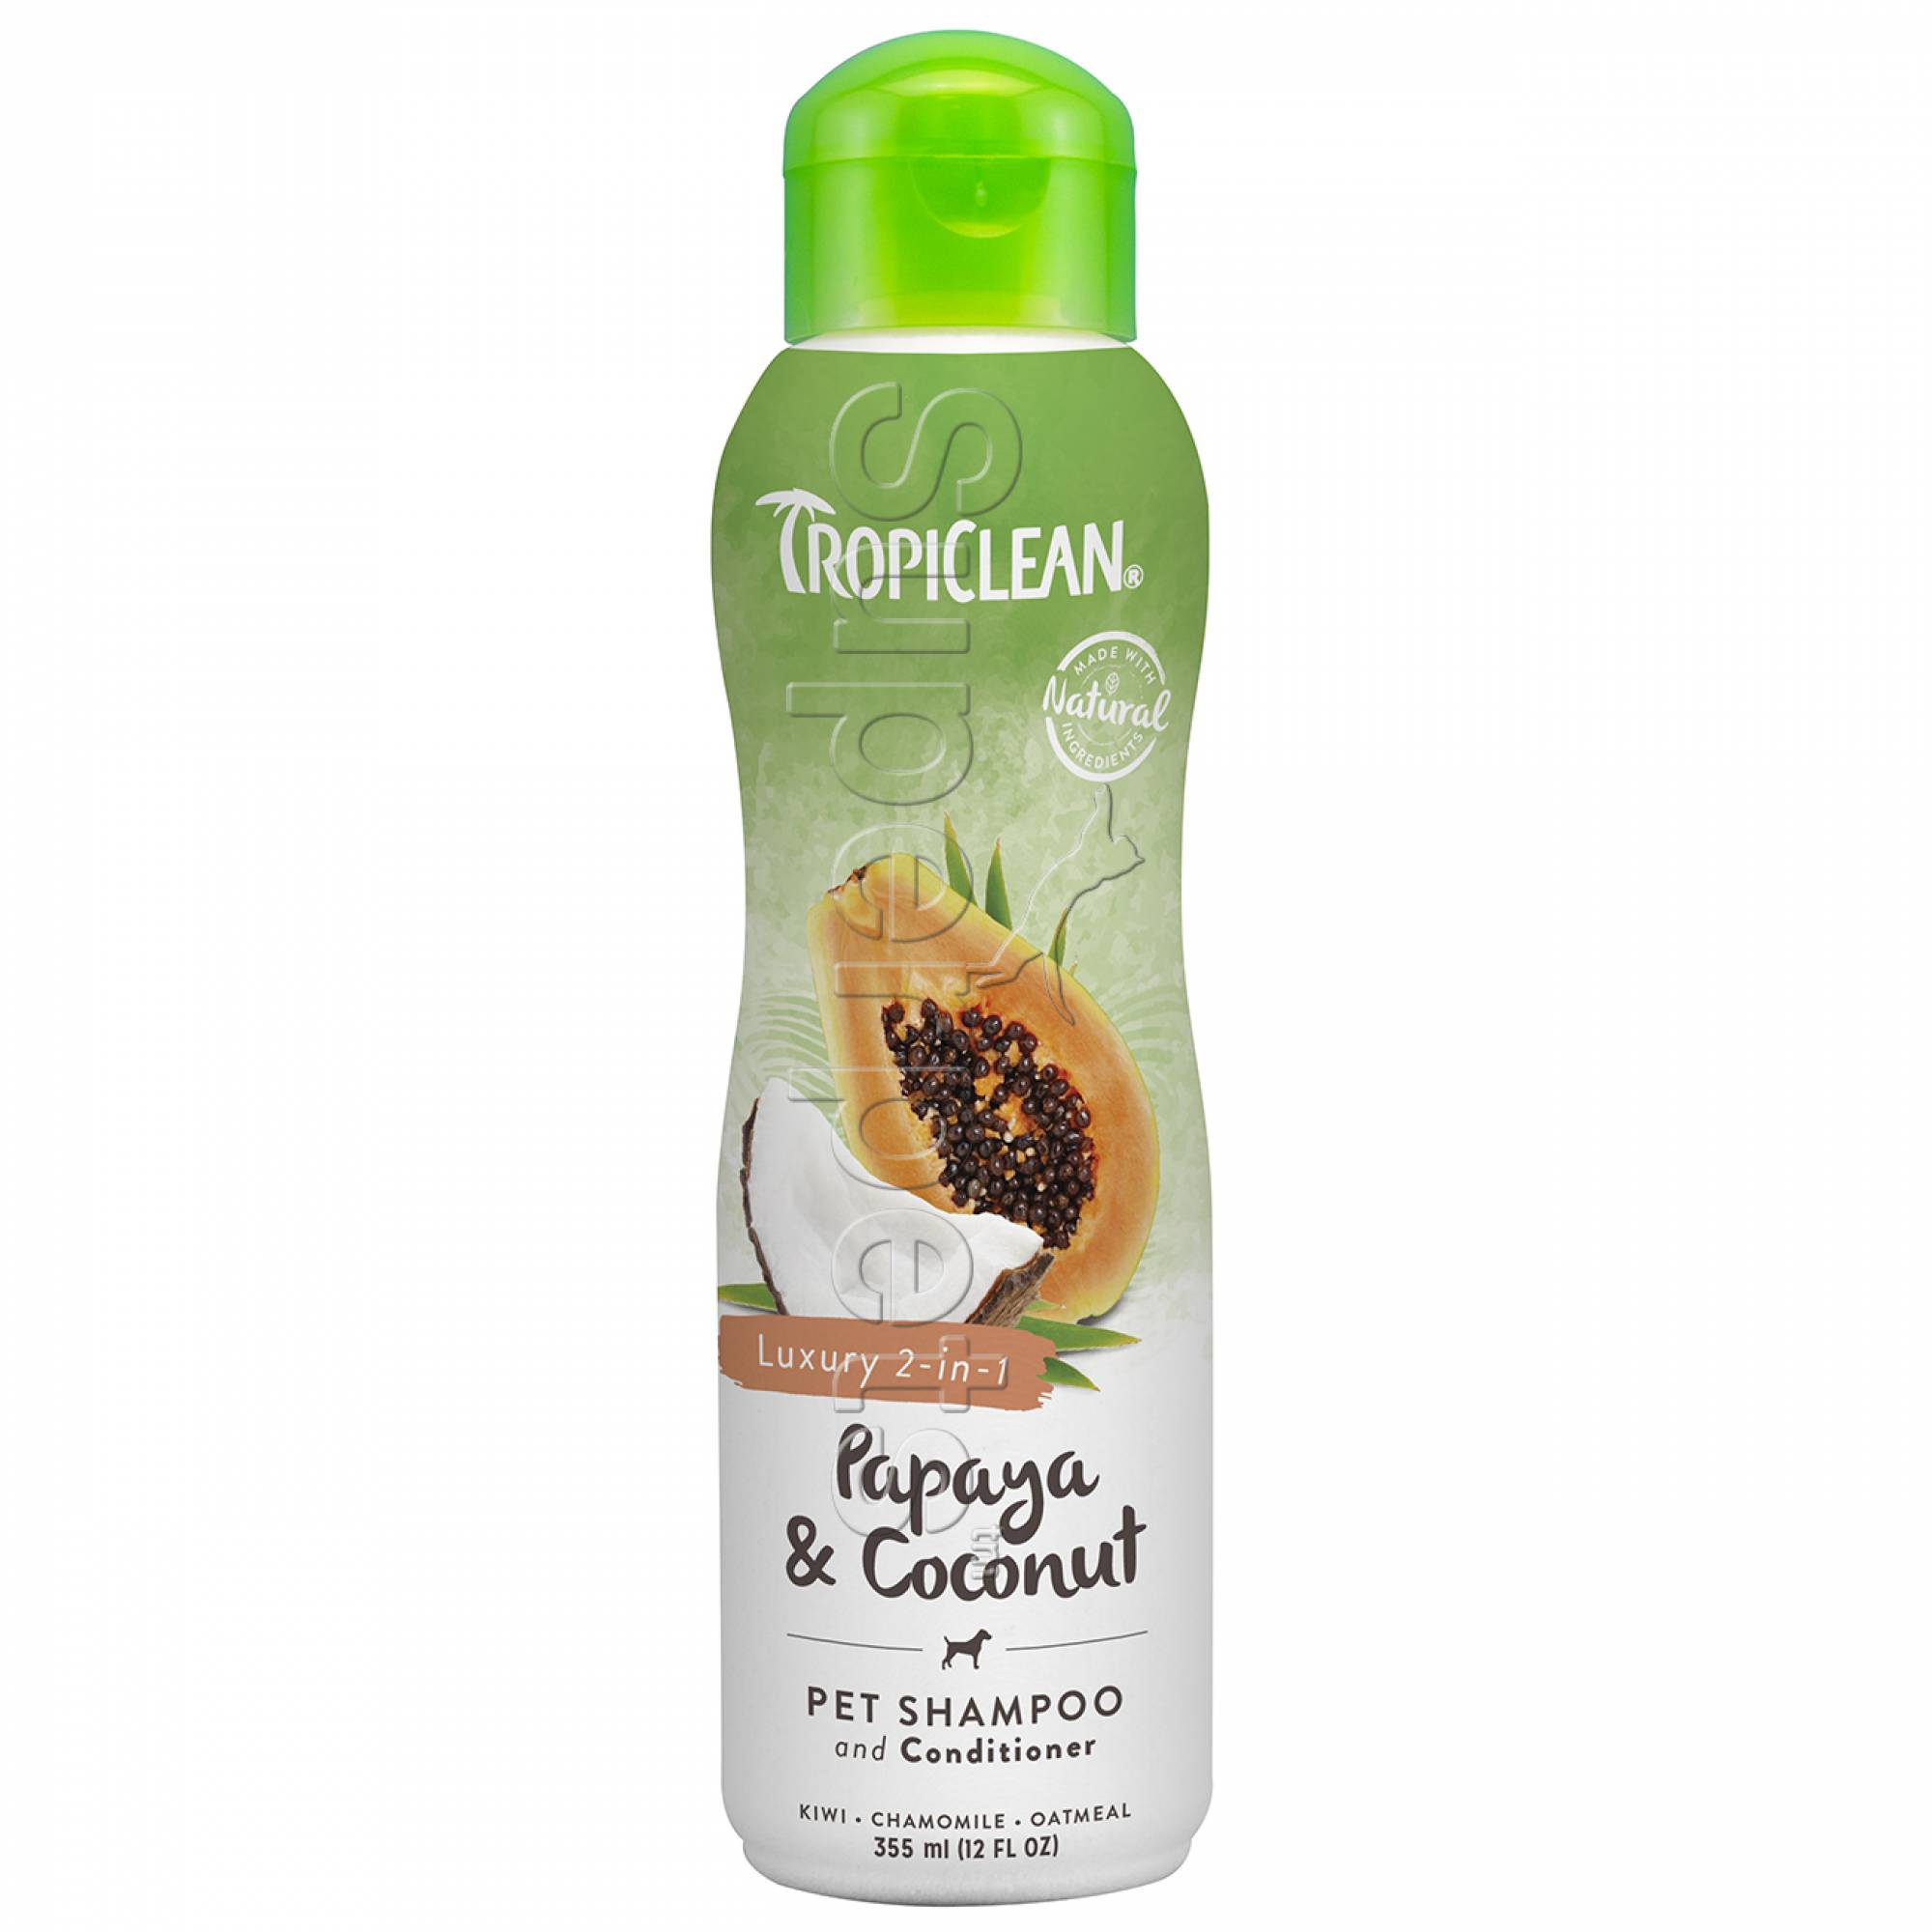 Tropiclean Luxury 2-in-1 Pet Shampoo & Conditioner - Papaya and Coconut 12oz (355ml)